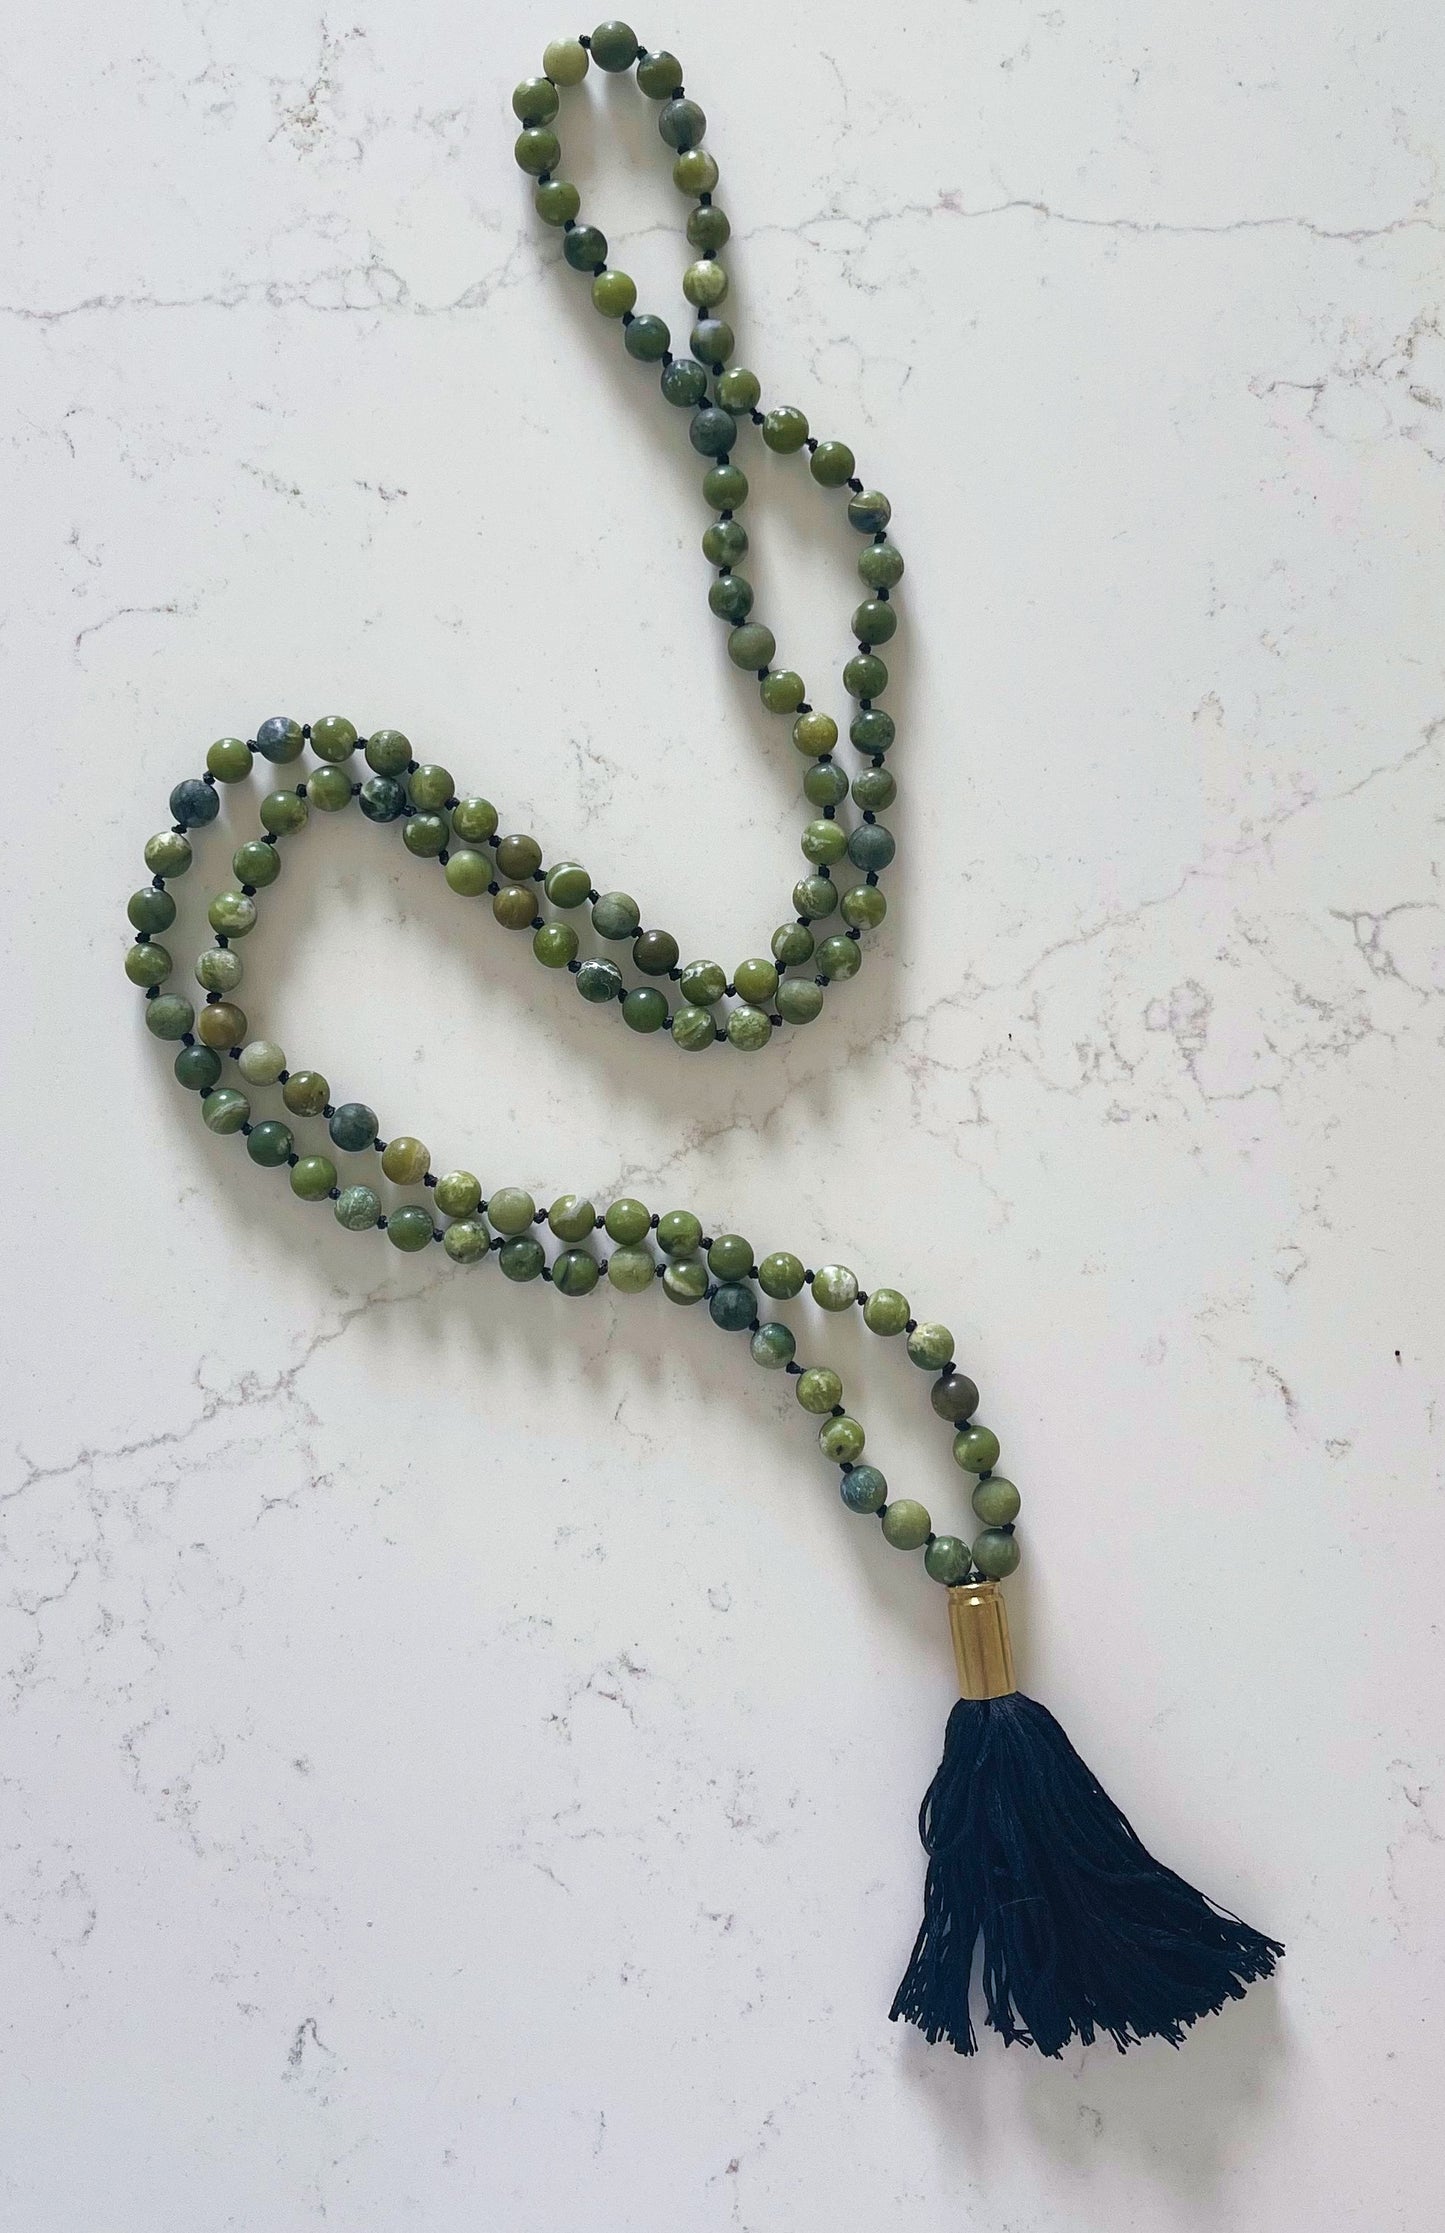 Low Gloss Green Mala Necklace with Black Tassel